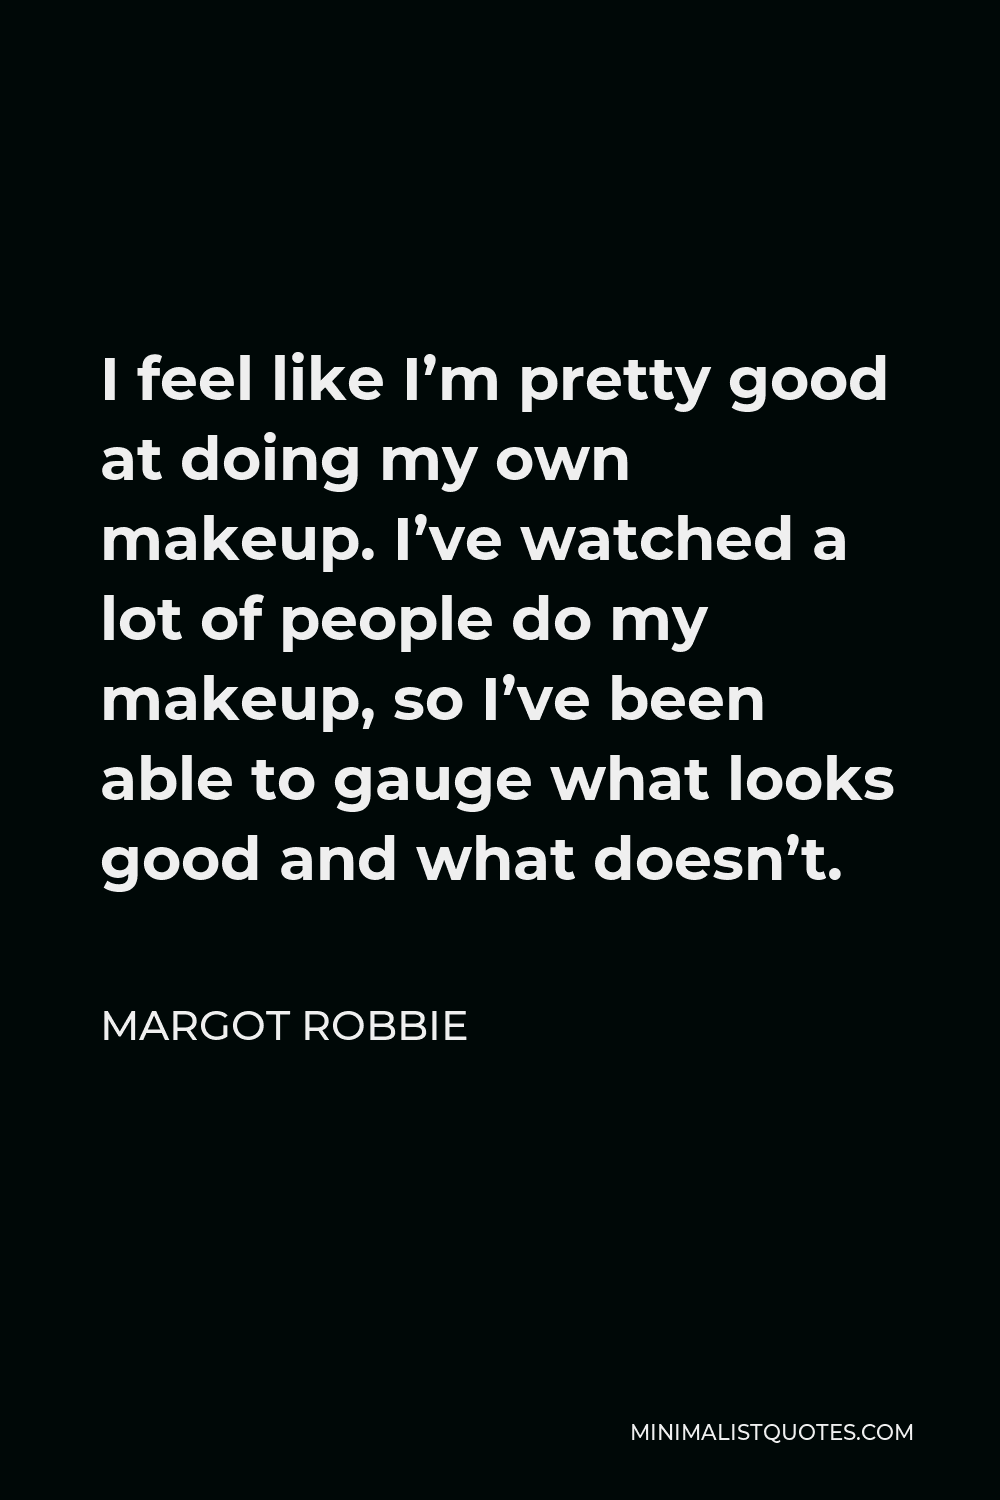 Margot Robbie Quote - I feel like I’m pretty good at doing my own makeup. I’ve watched a lot of people do my makeup, so I’ve been able to gauge what looks good and what doesn’t.